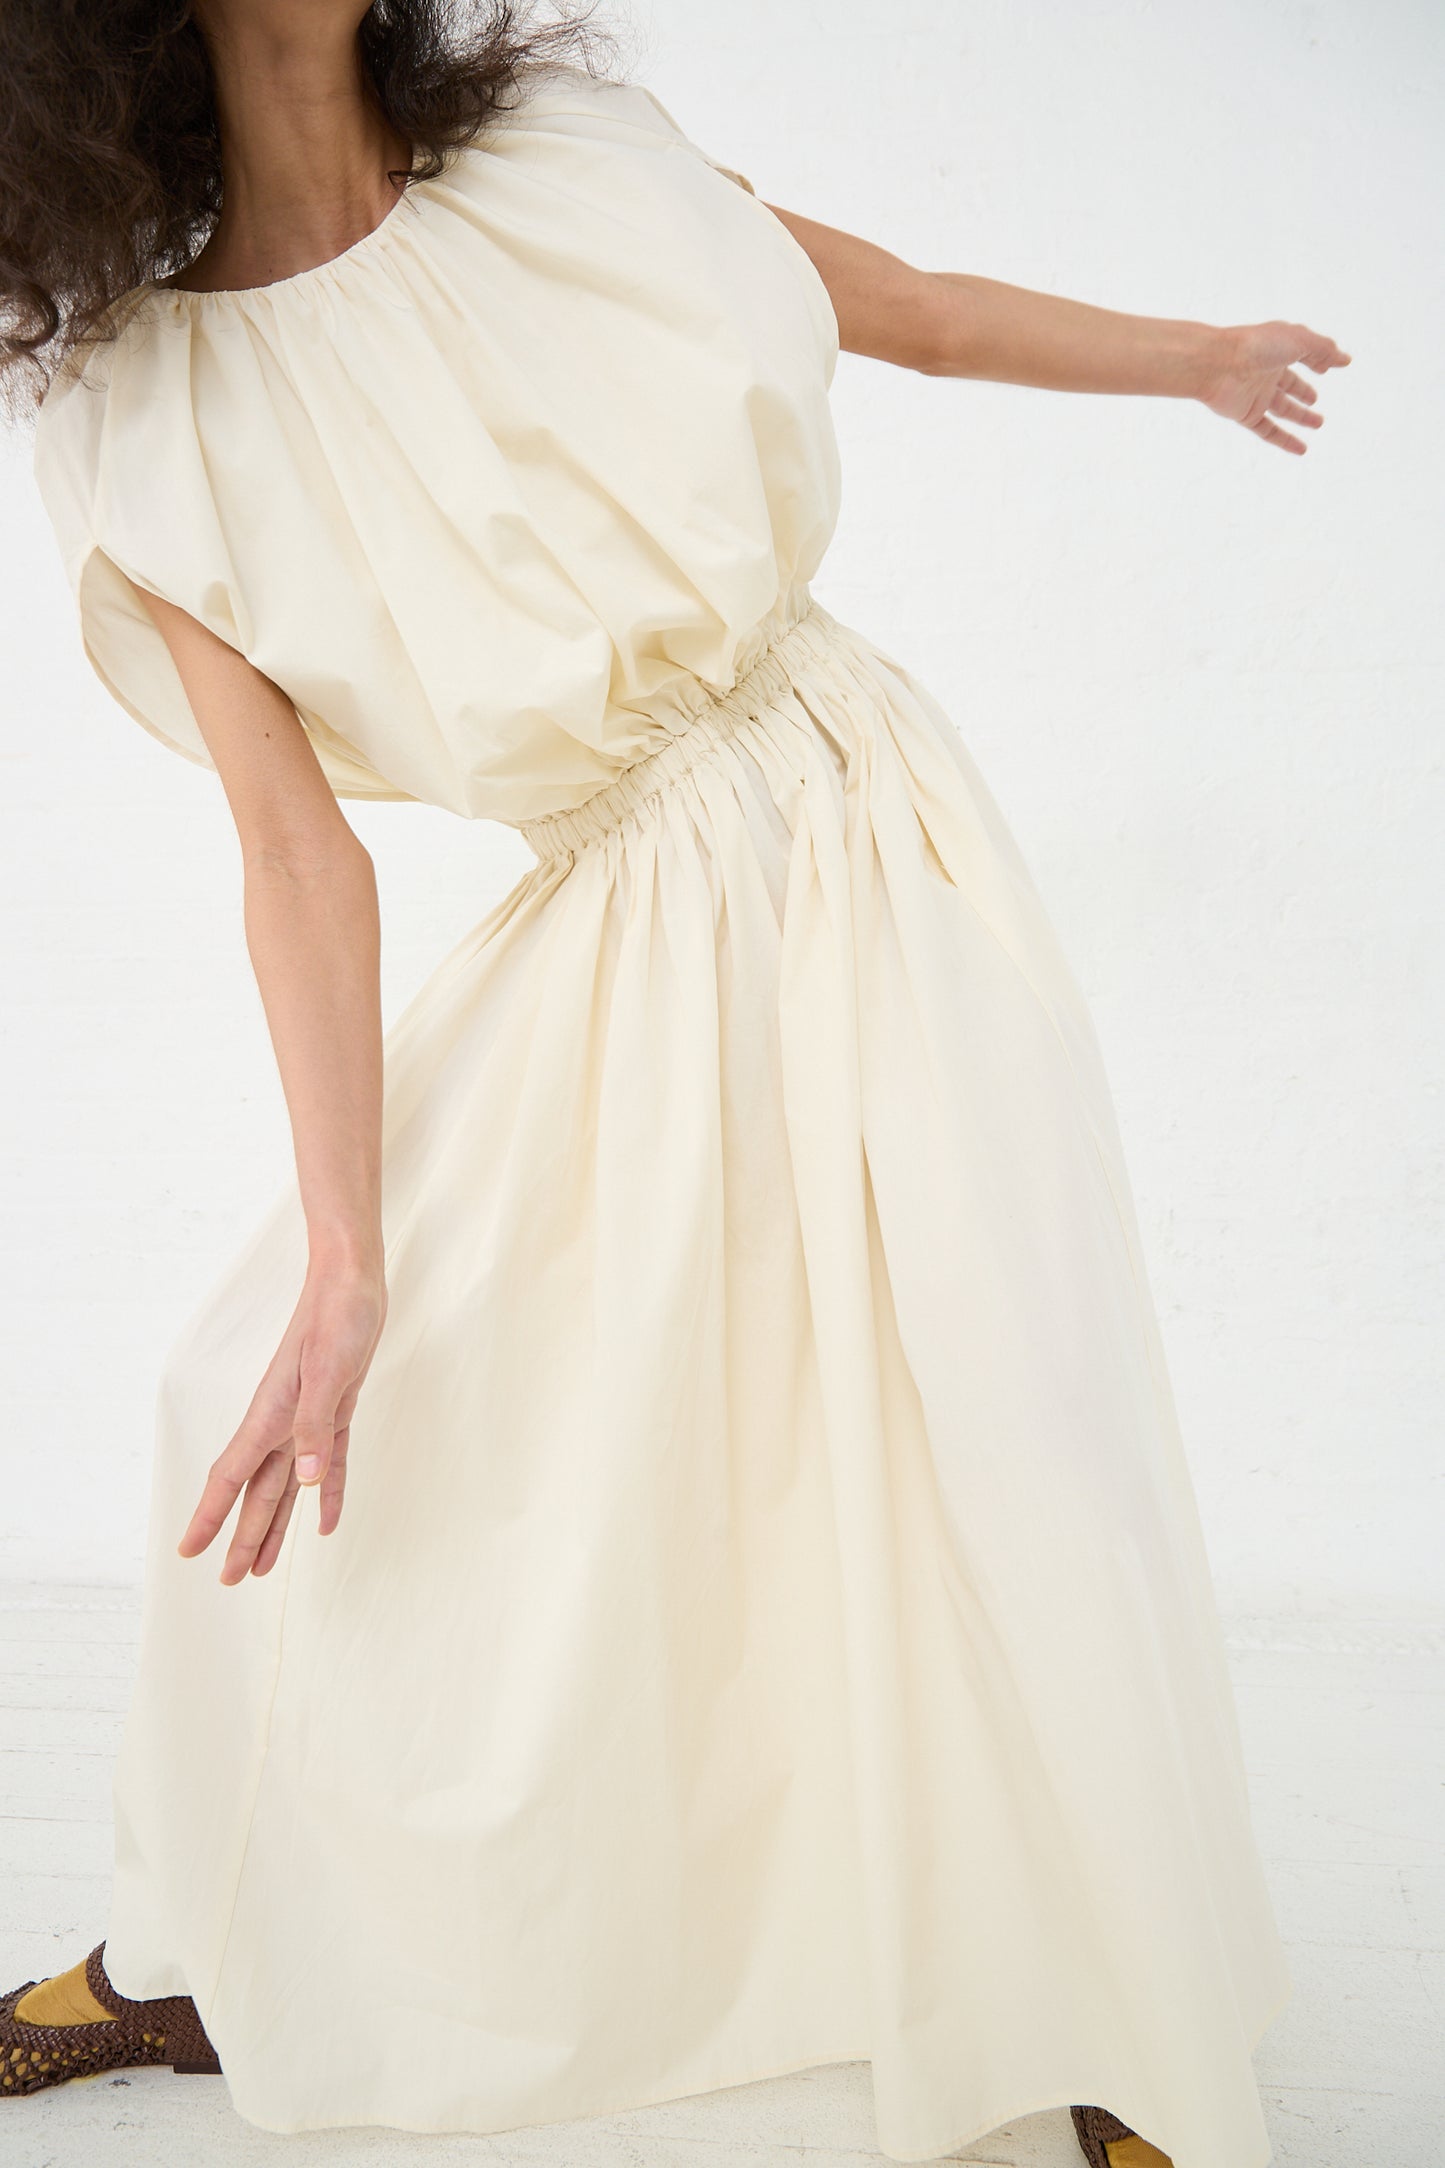 Woman in a Black Crane Organic Cotton Shell Dress in Cream, with gathered waist detailing, posing against a white background.